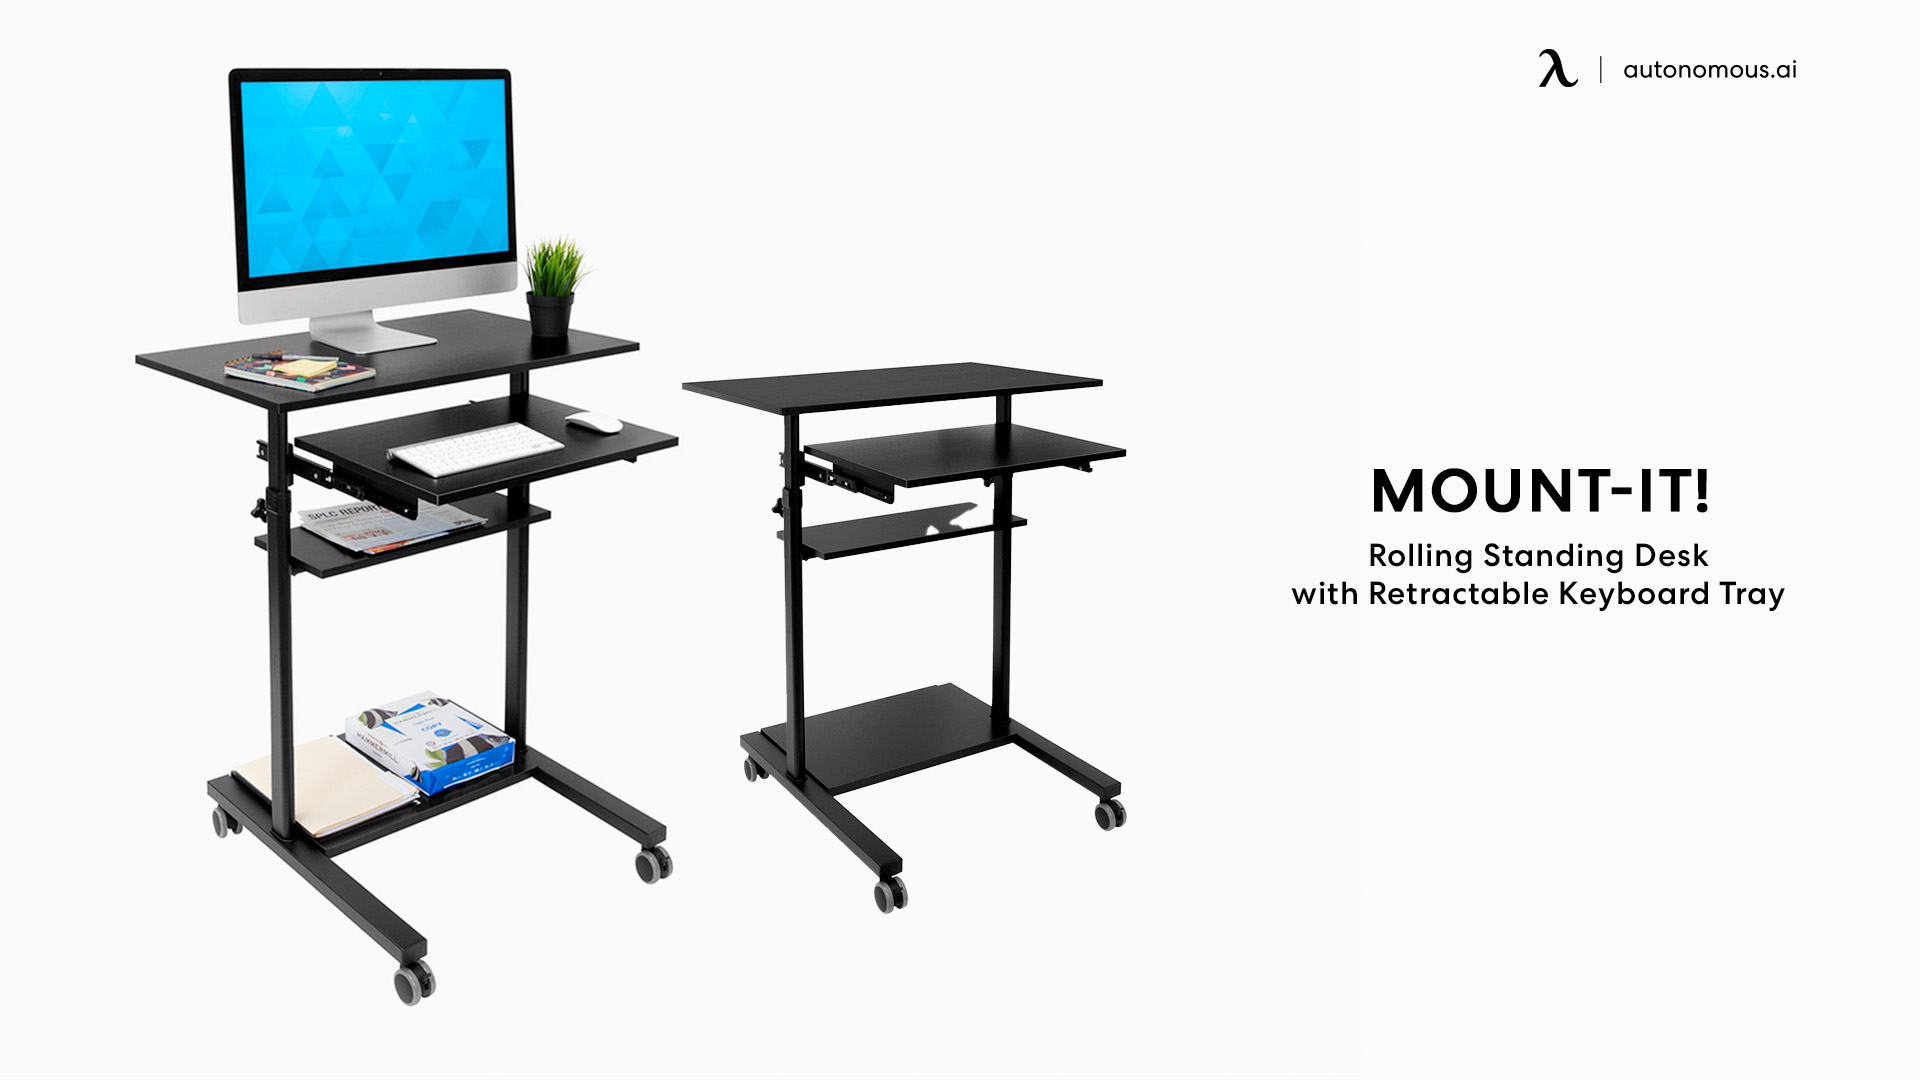 Mount-It! Rolling Standing Desk with Retractable Keyboard Tray